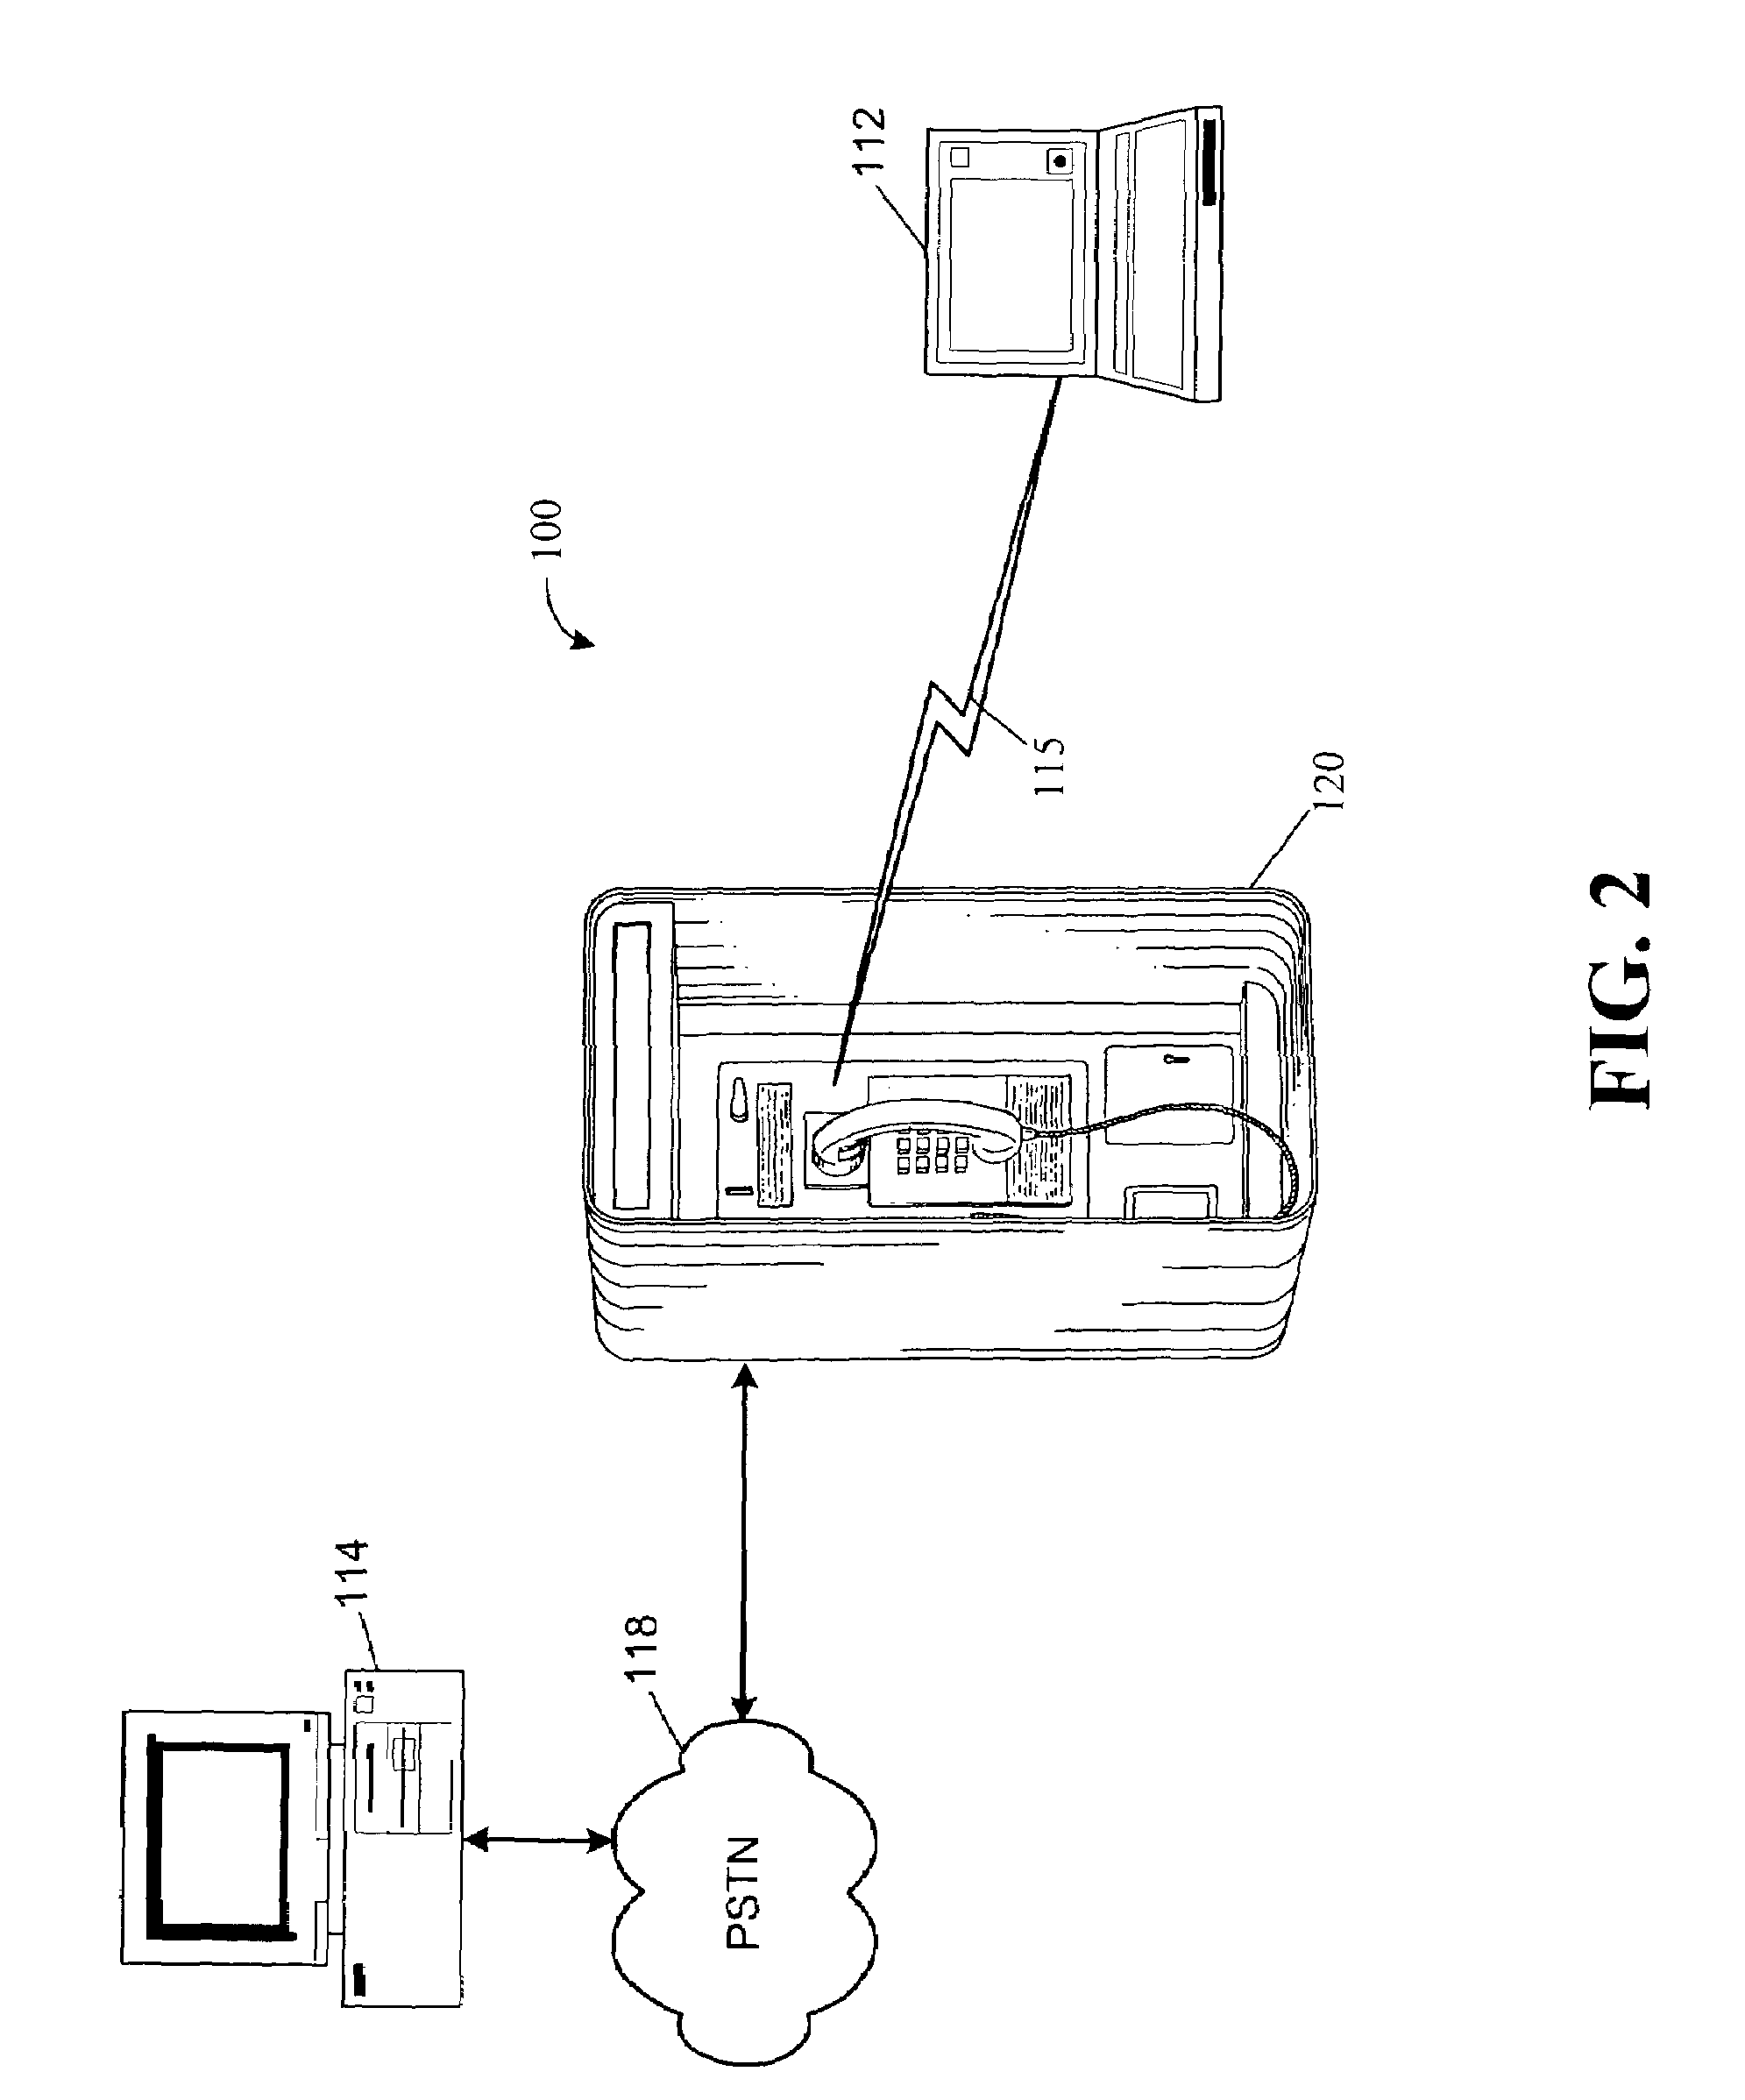 System and method for communicating with a remote communication unit via the public switched telephone network (PSTN)